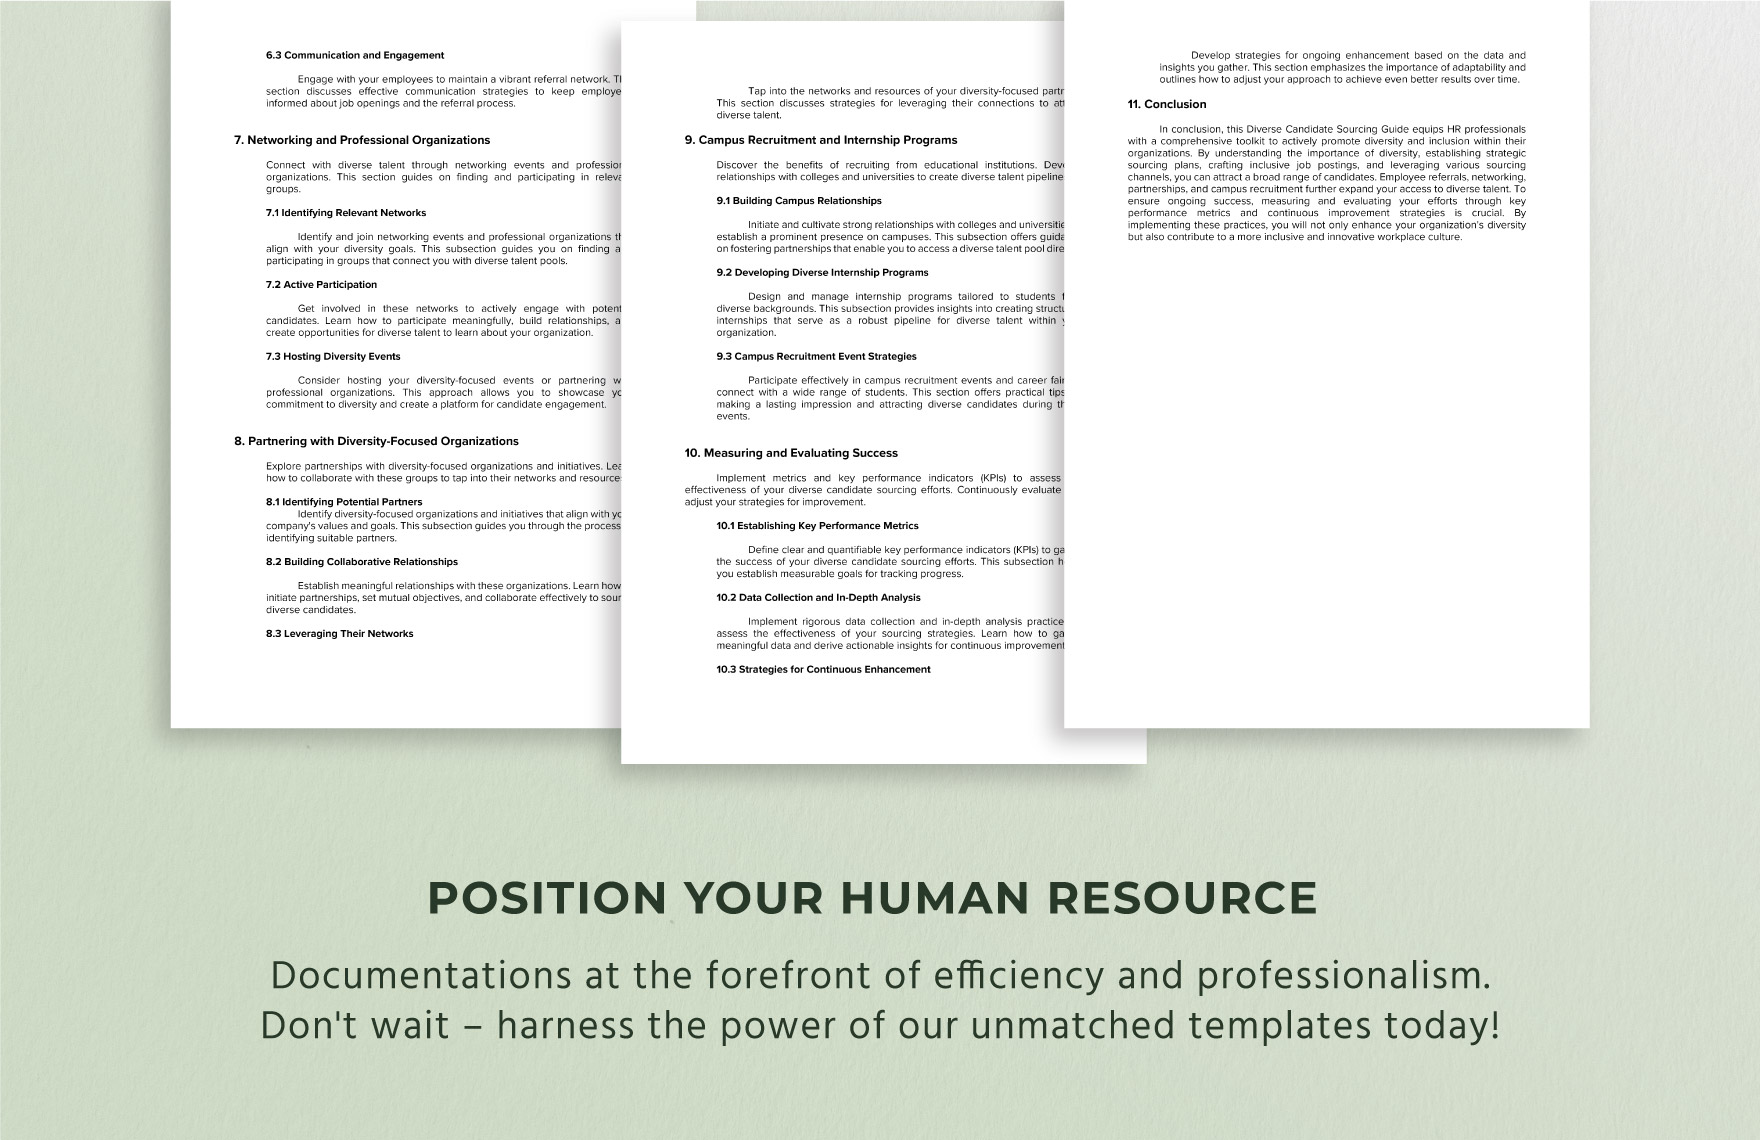 Diverse Candidate Sourcing Guide HR Template